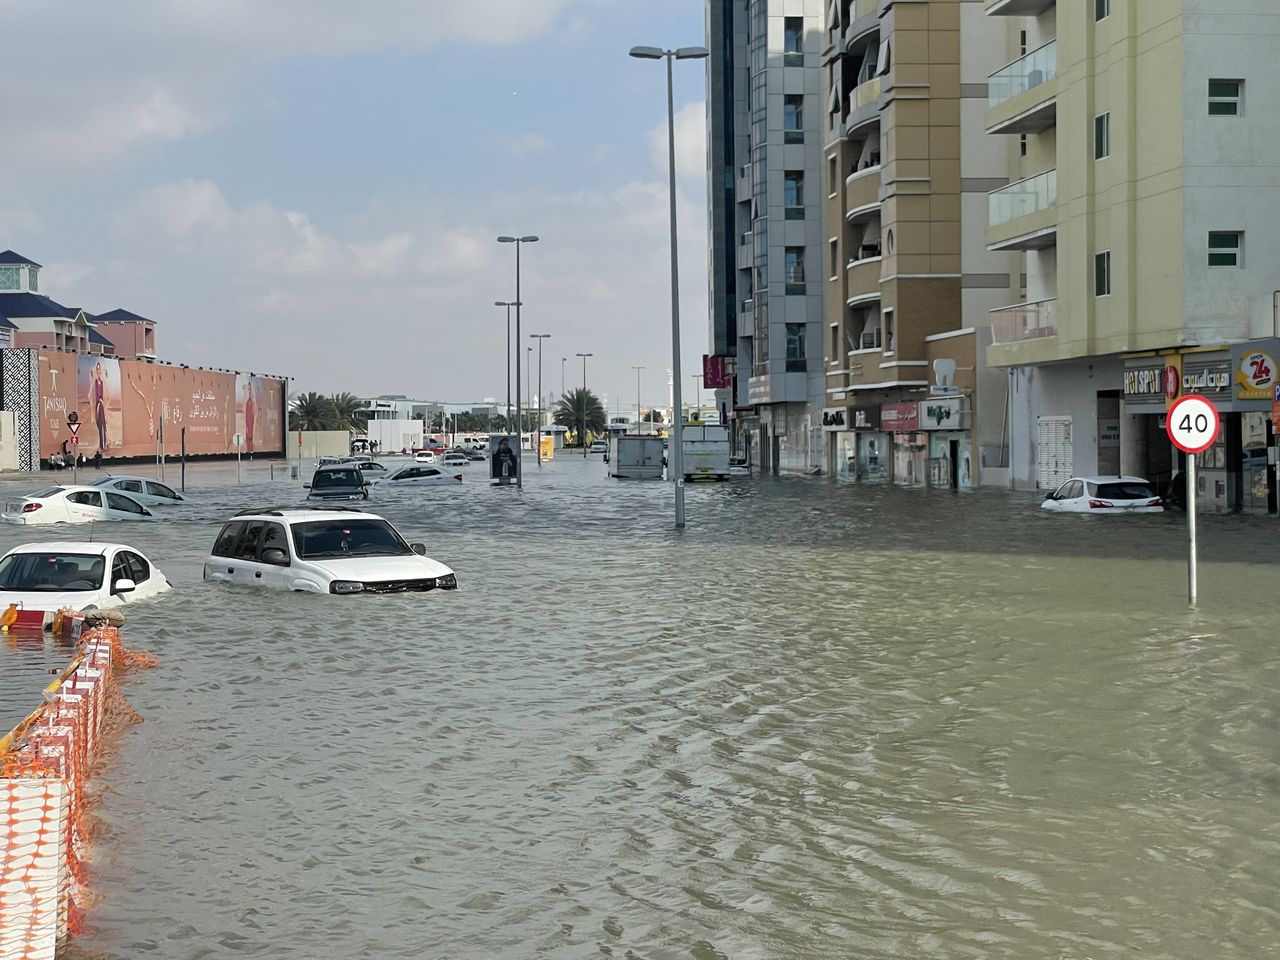 Dubai deluged: Year's worth of rain in 12 hours paralyzes city